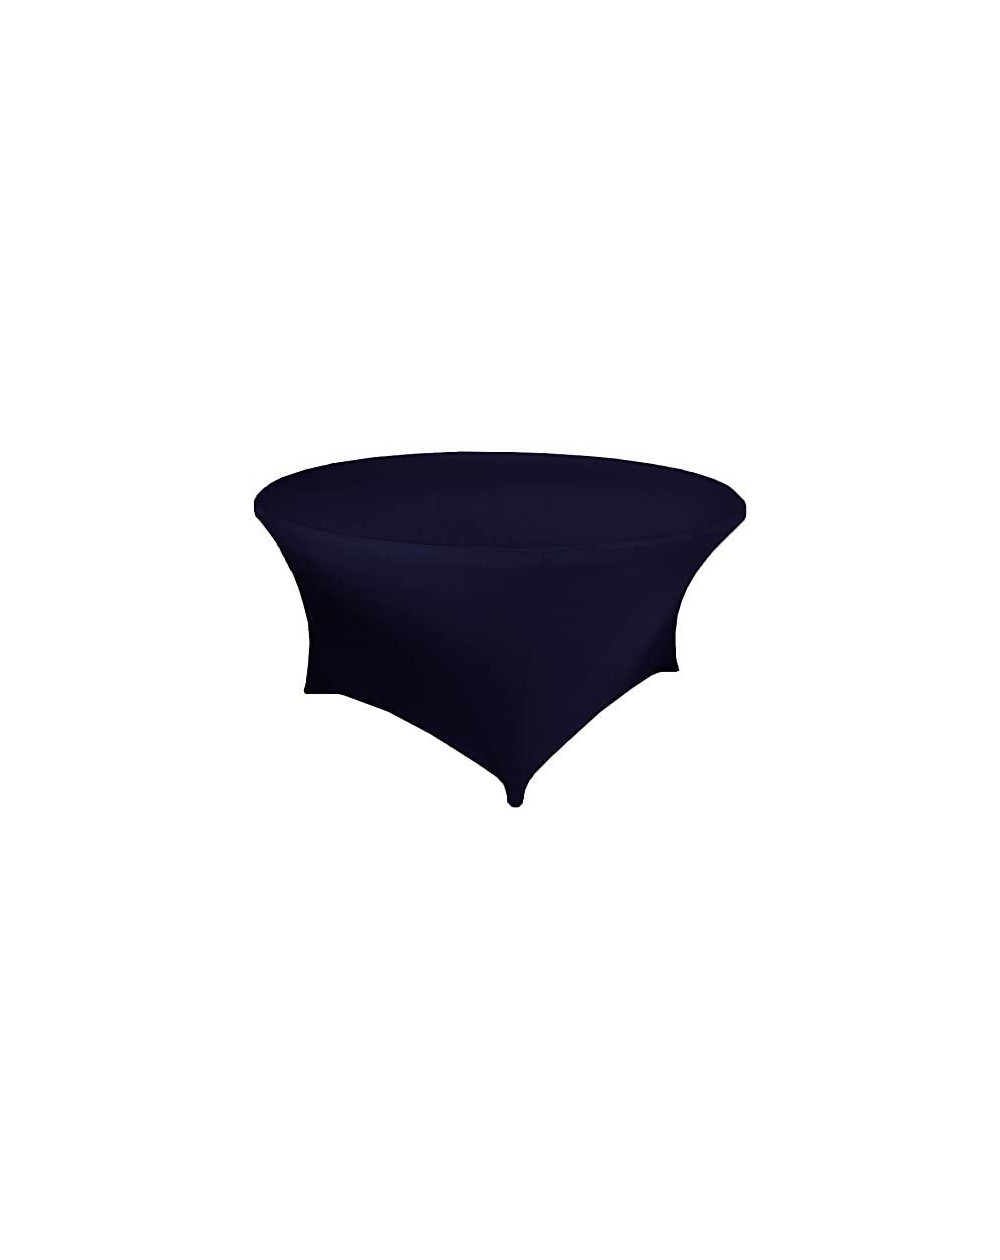 Tablecovers Wholesale (200 GSM) 5 FT (60 in) Round Spandex Stretch Fitted Table Cover Tablecloths Navy Blue - Navy Blue - CG1...